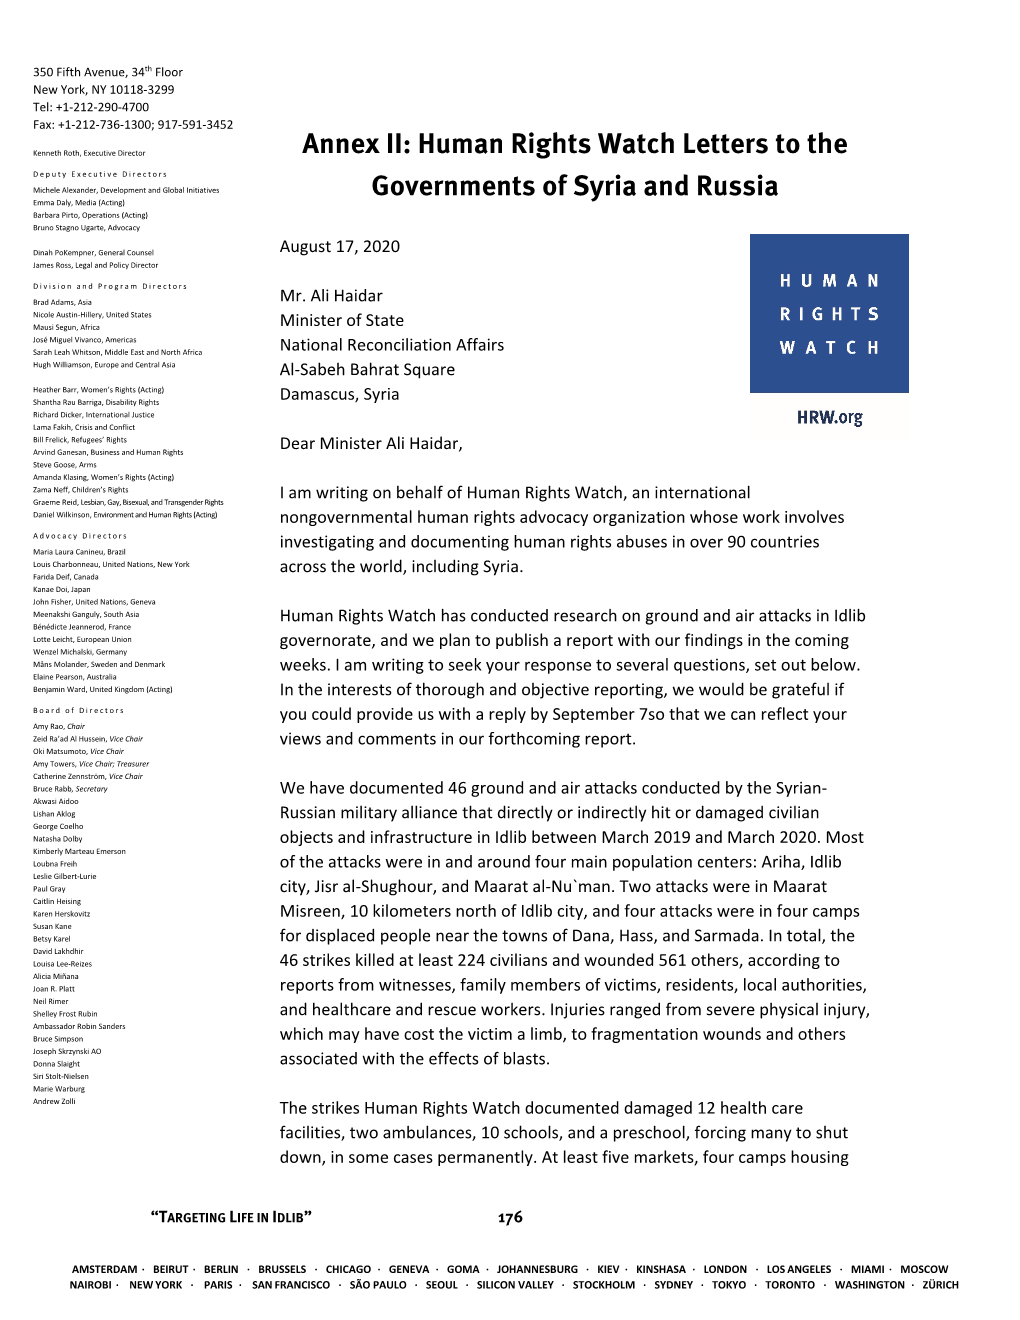 Annex II: Human Rights Watch Letters to the Governments of Syria and Russia